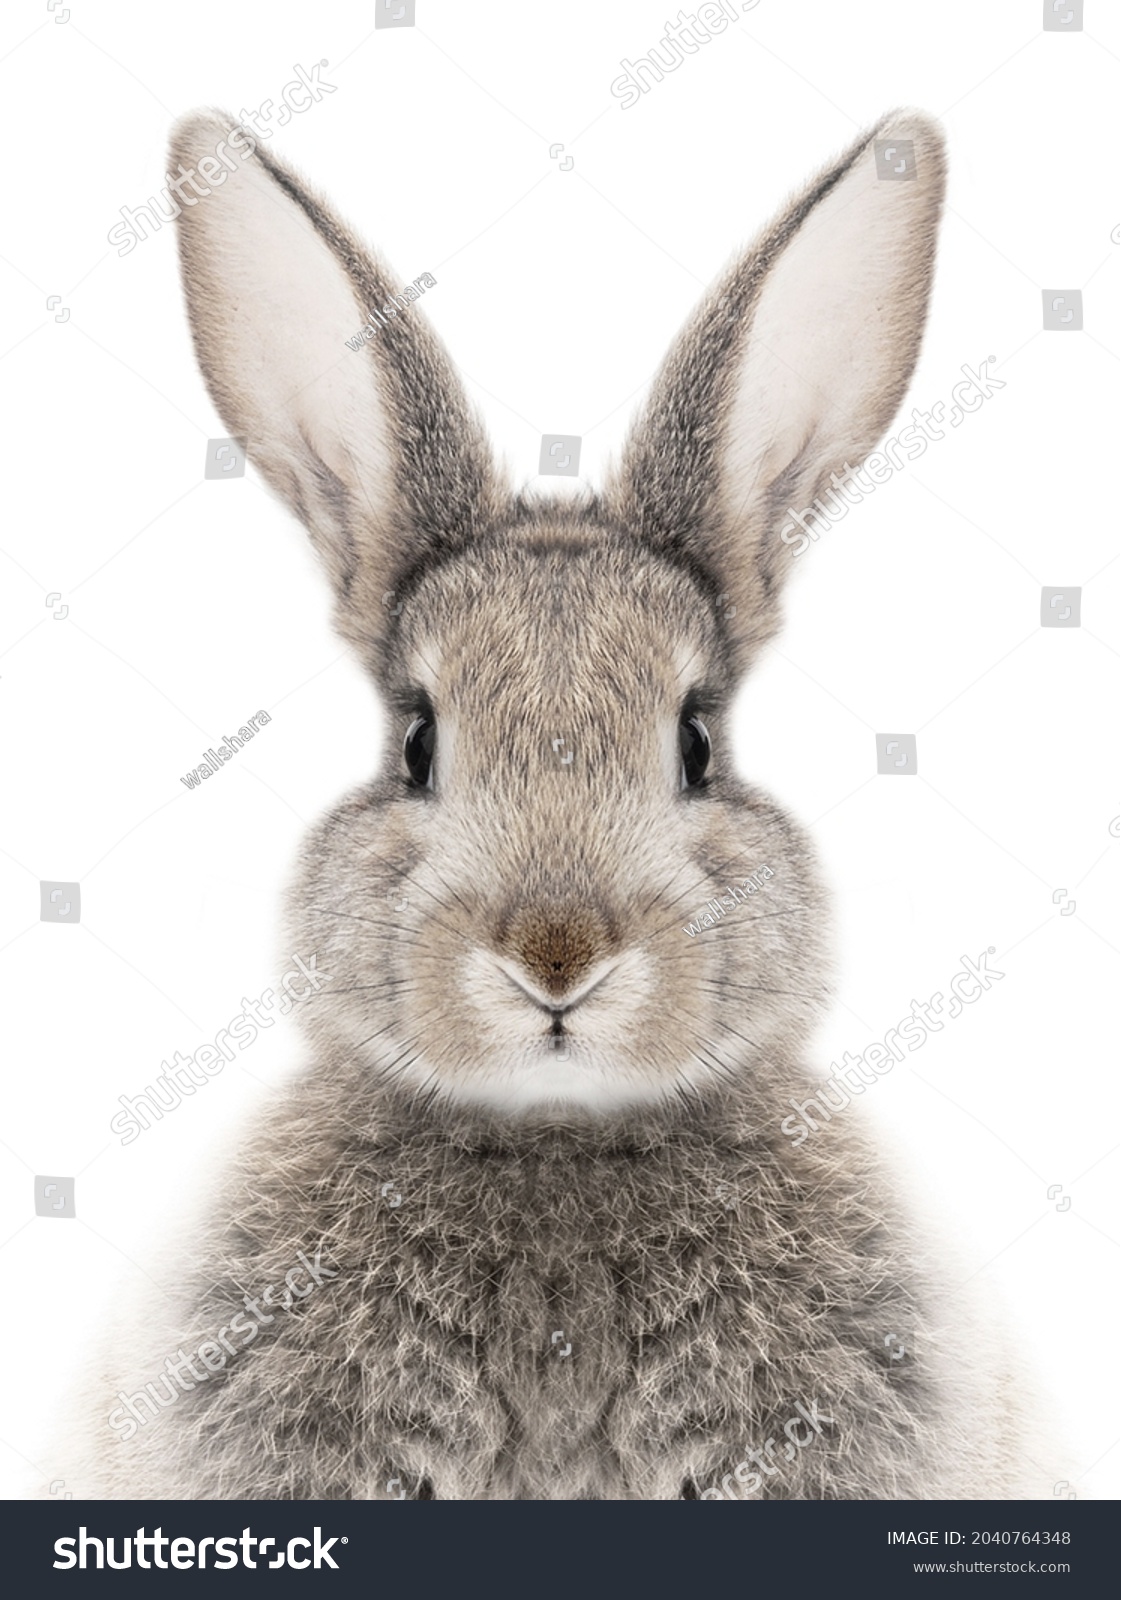 photo of a gray bunny on a white background for digital printing wallpaper, custom design  #2040764348